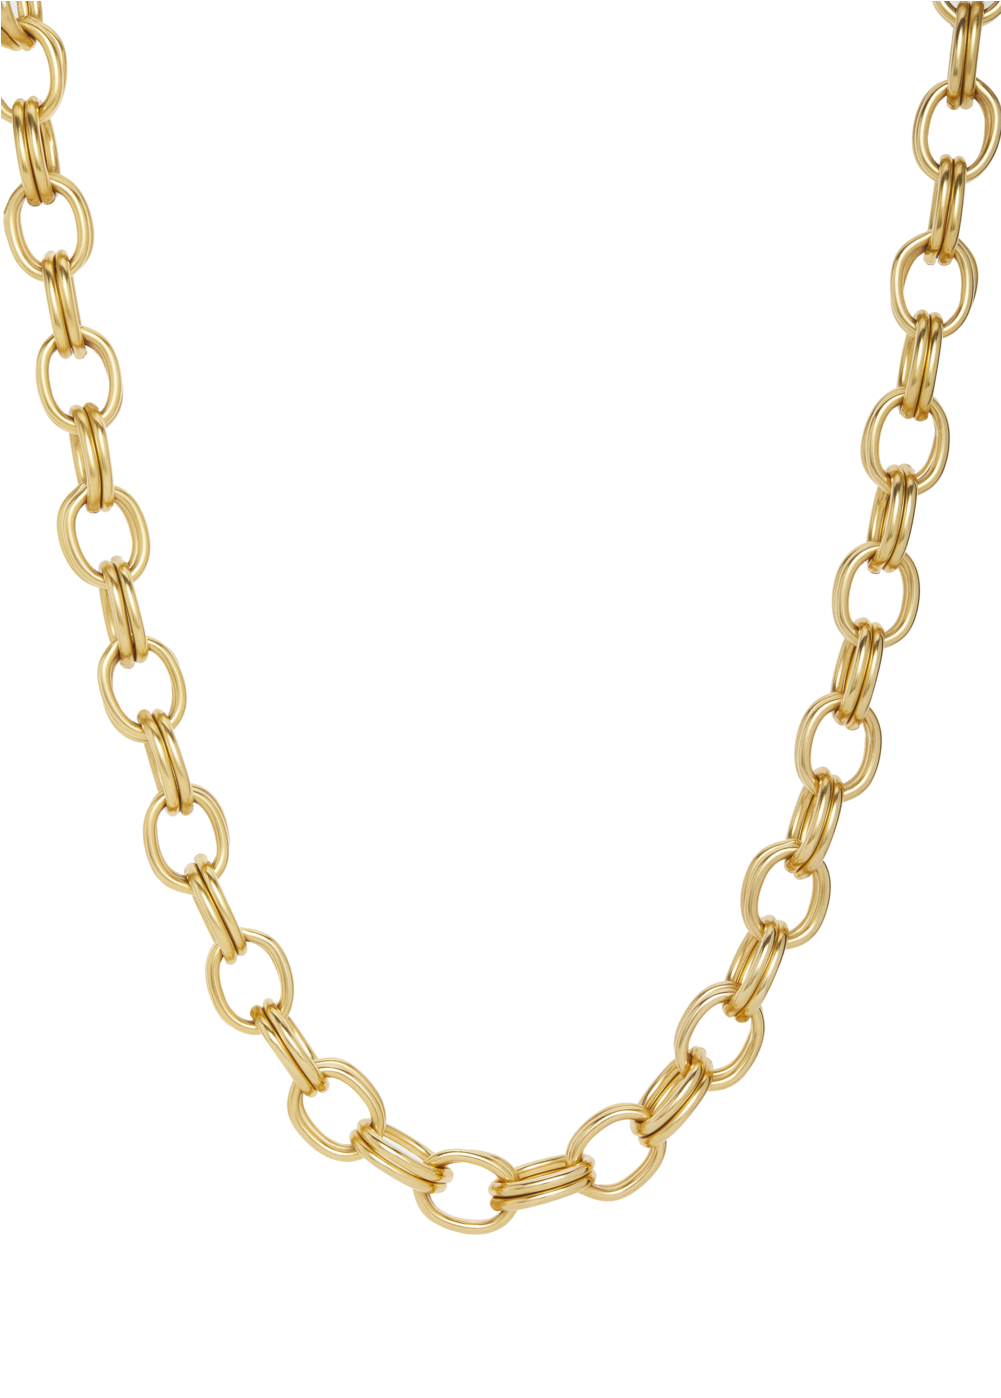 Gold chain. Цепочка текстура. Золотая цепочка текстура. Бусы Golden Chain. Gold Chain vector.